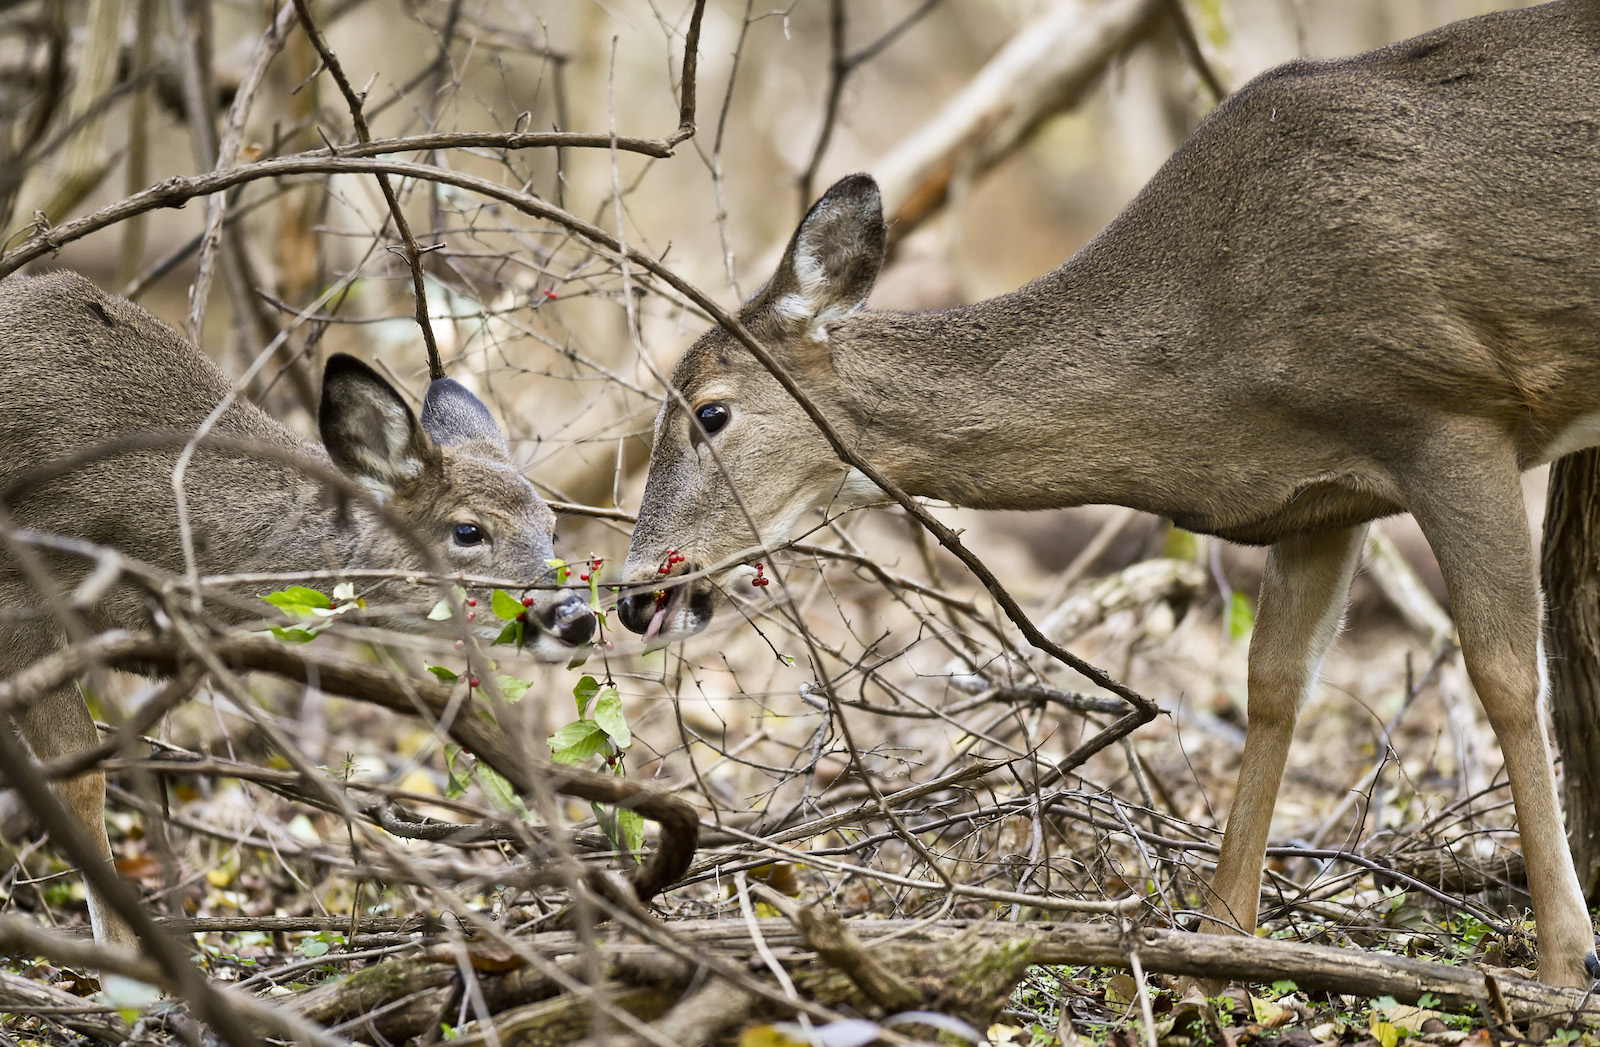 two deer eat berries near branches